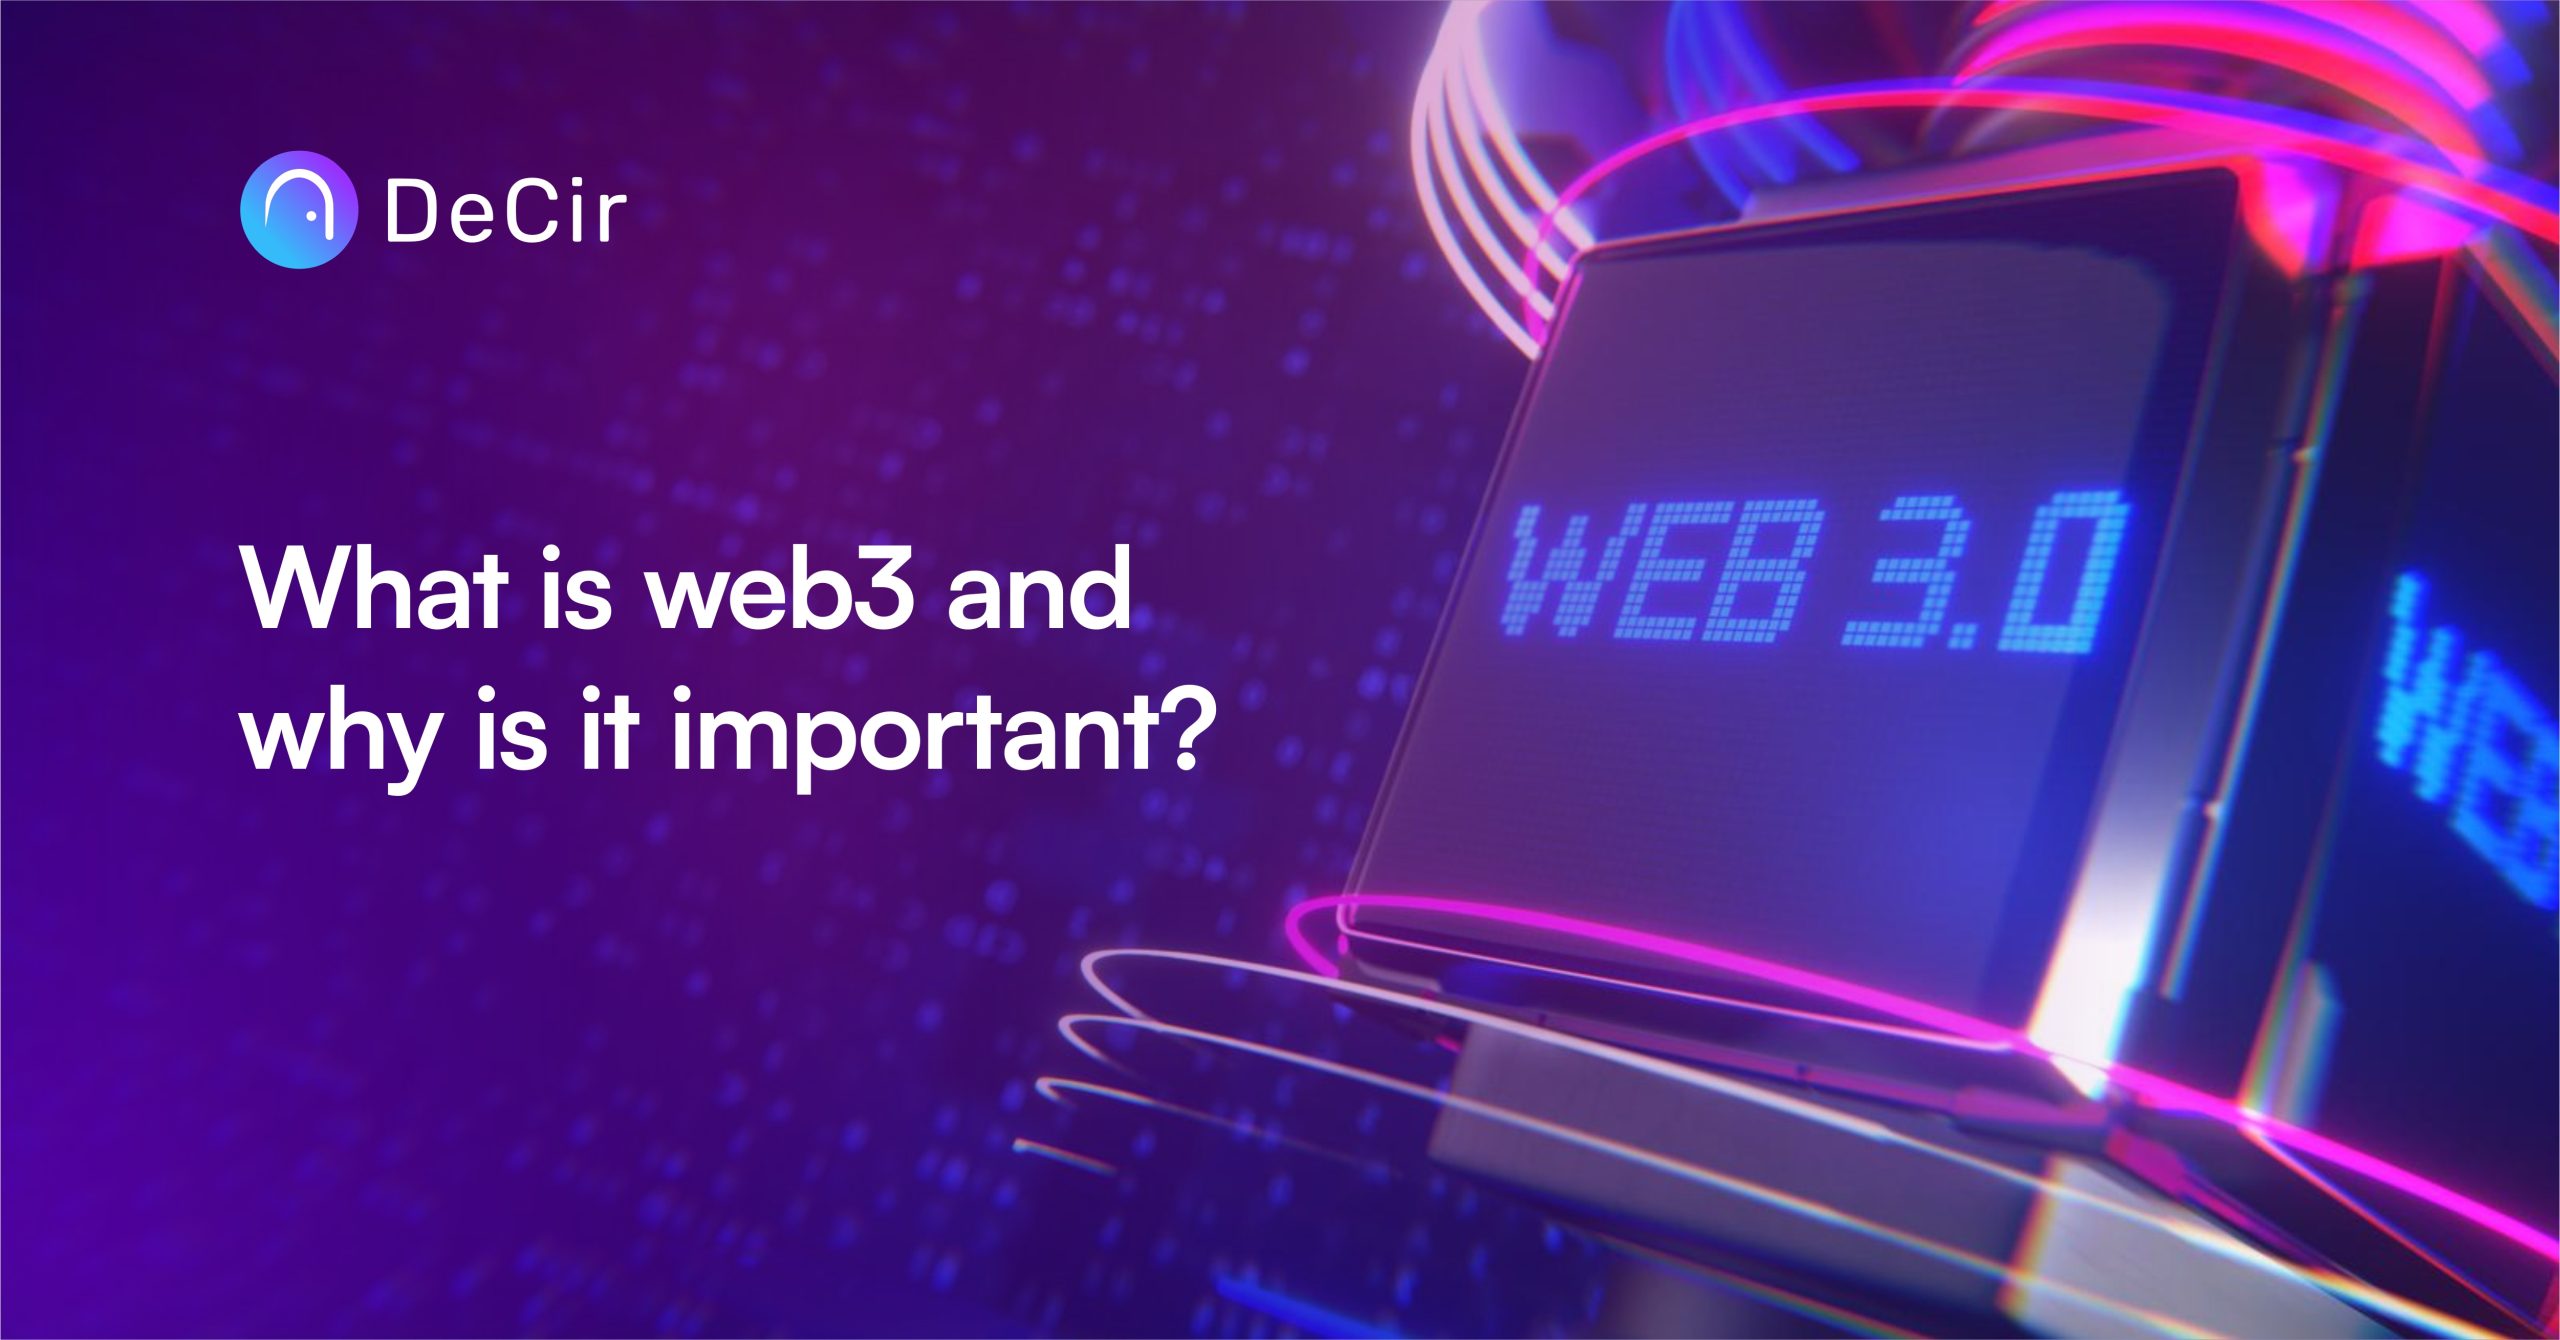 What is Web3 and why is it important?